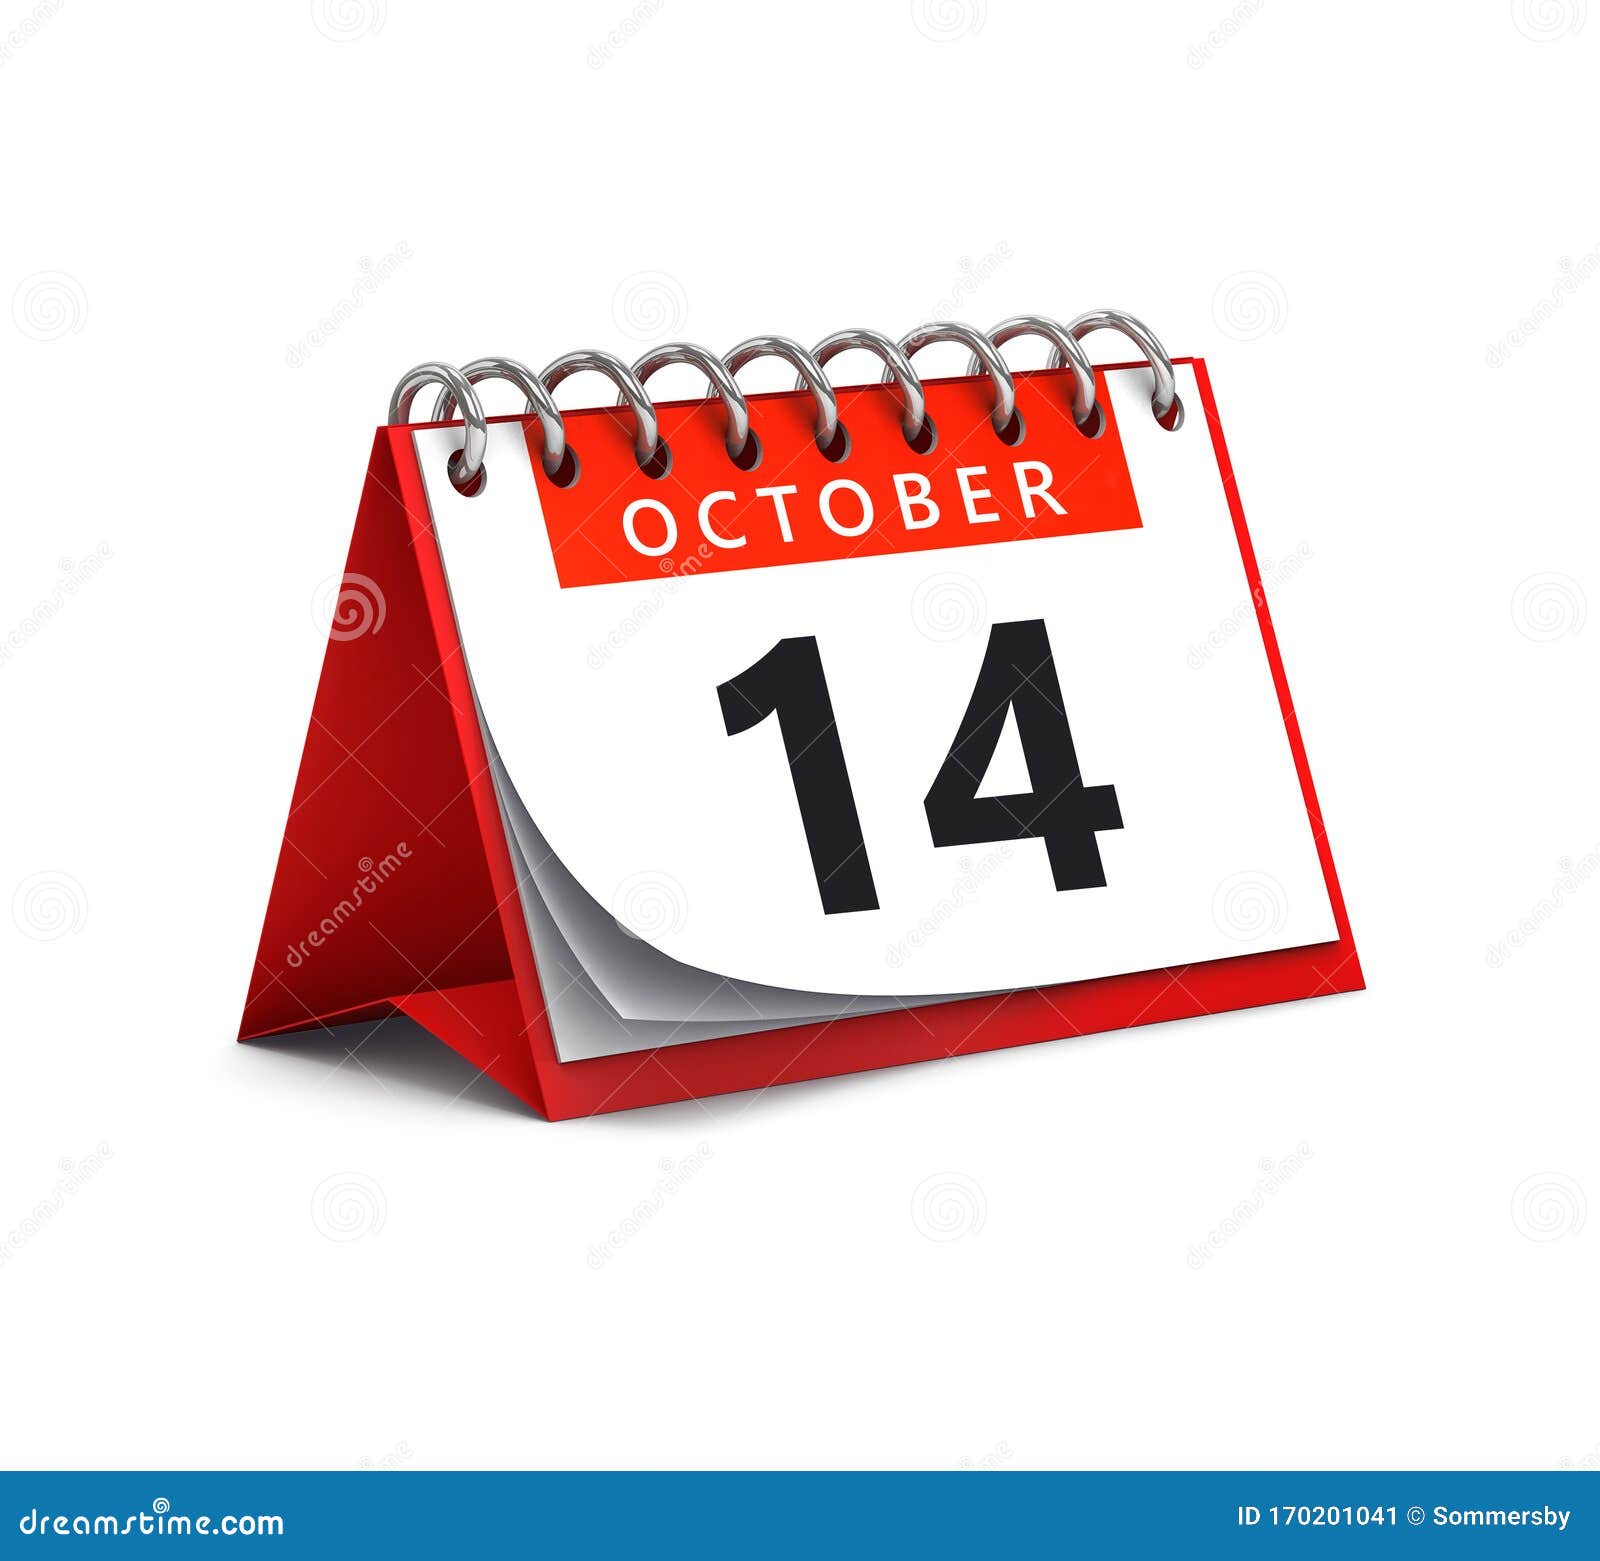 3D Rendering of Red Desk Paper Autumn Month of October 14 Date